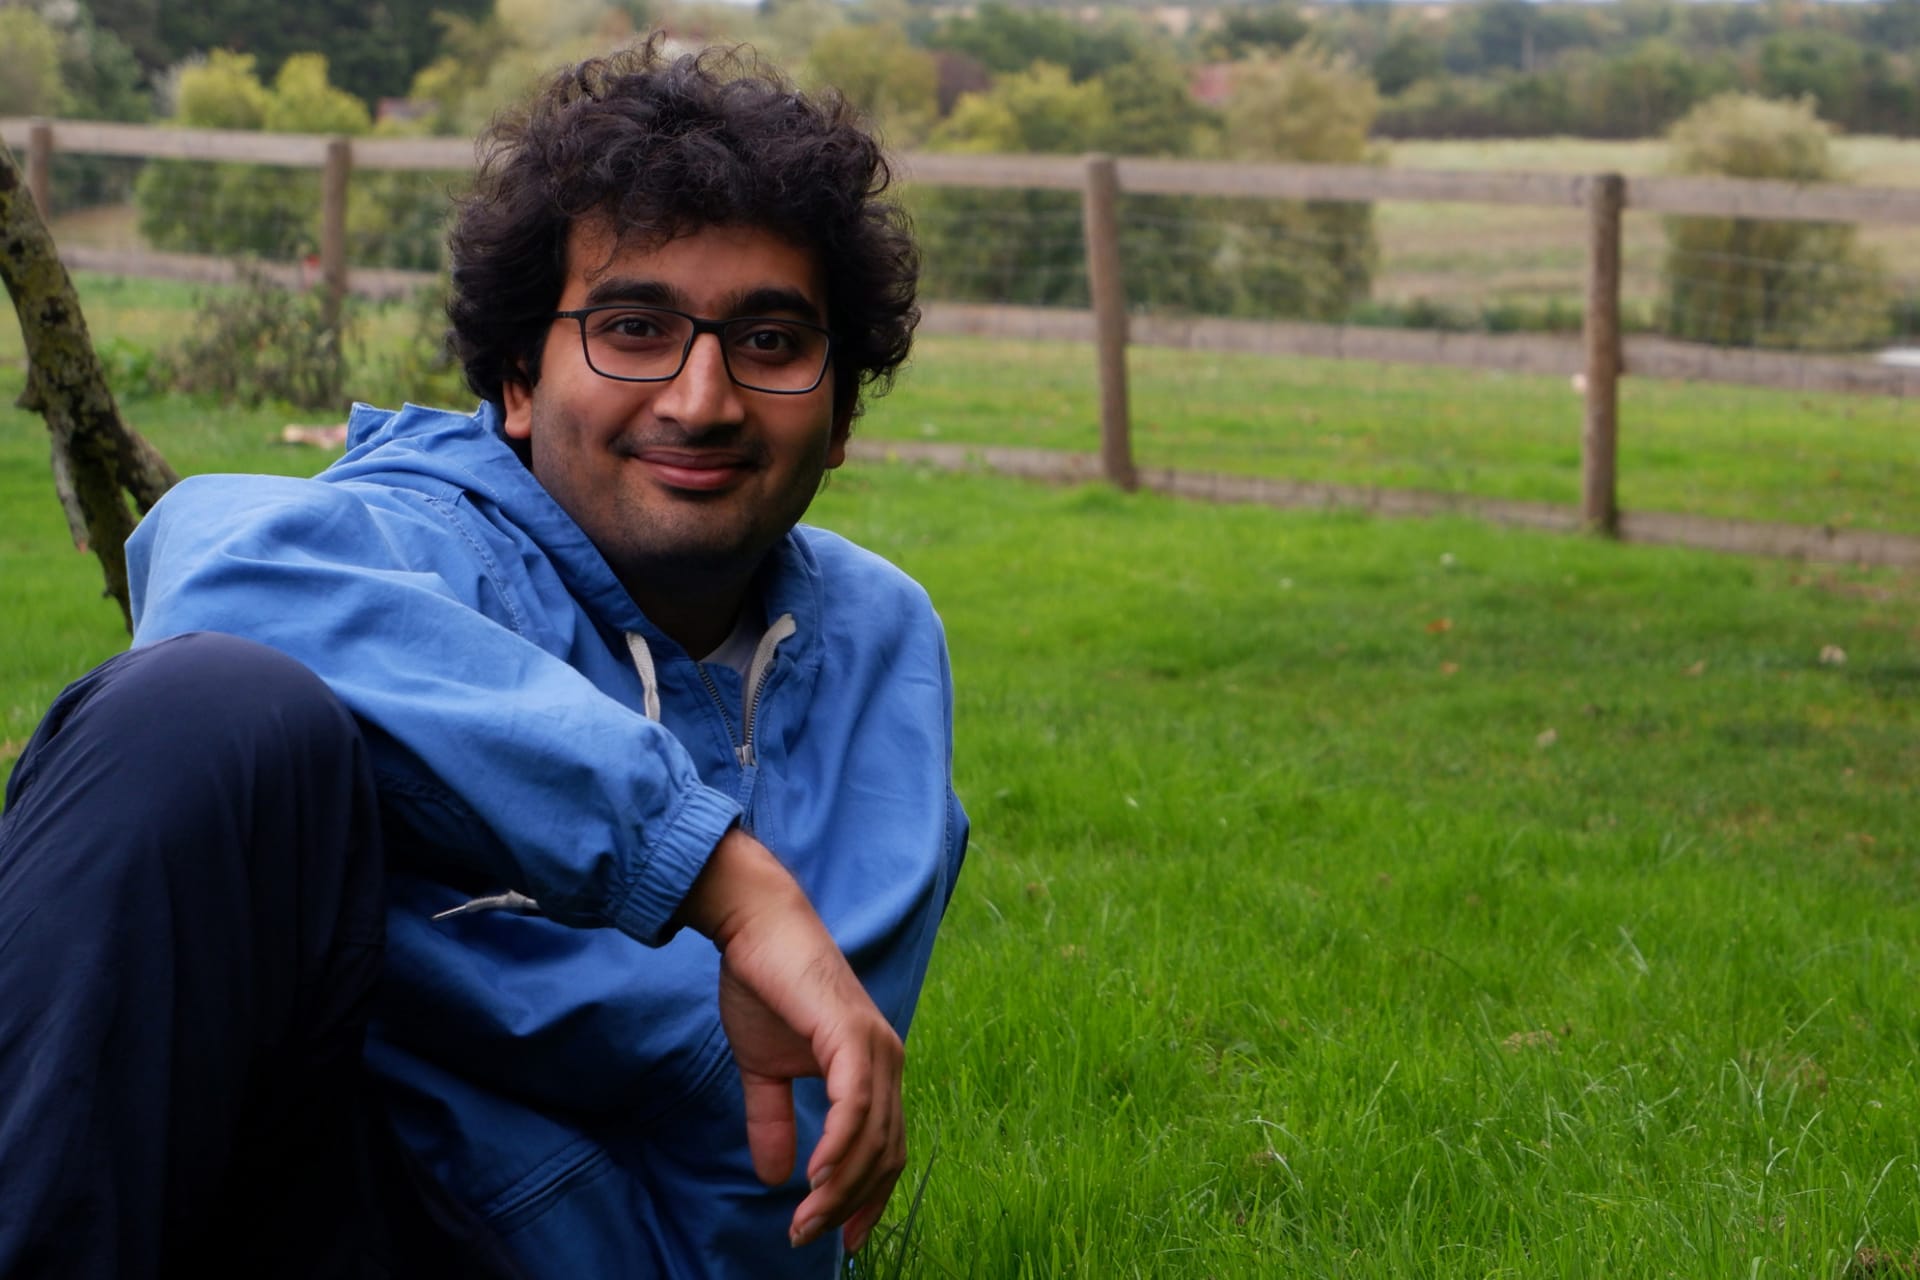 An image of Janmejay (me) sitting on the grass in a garden, smiling